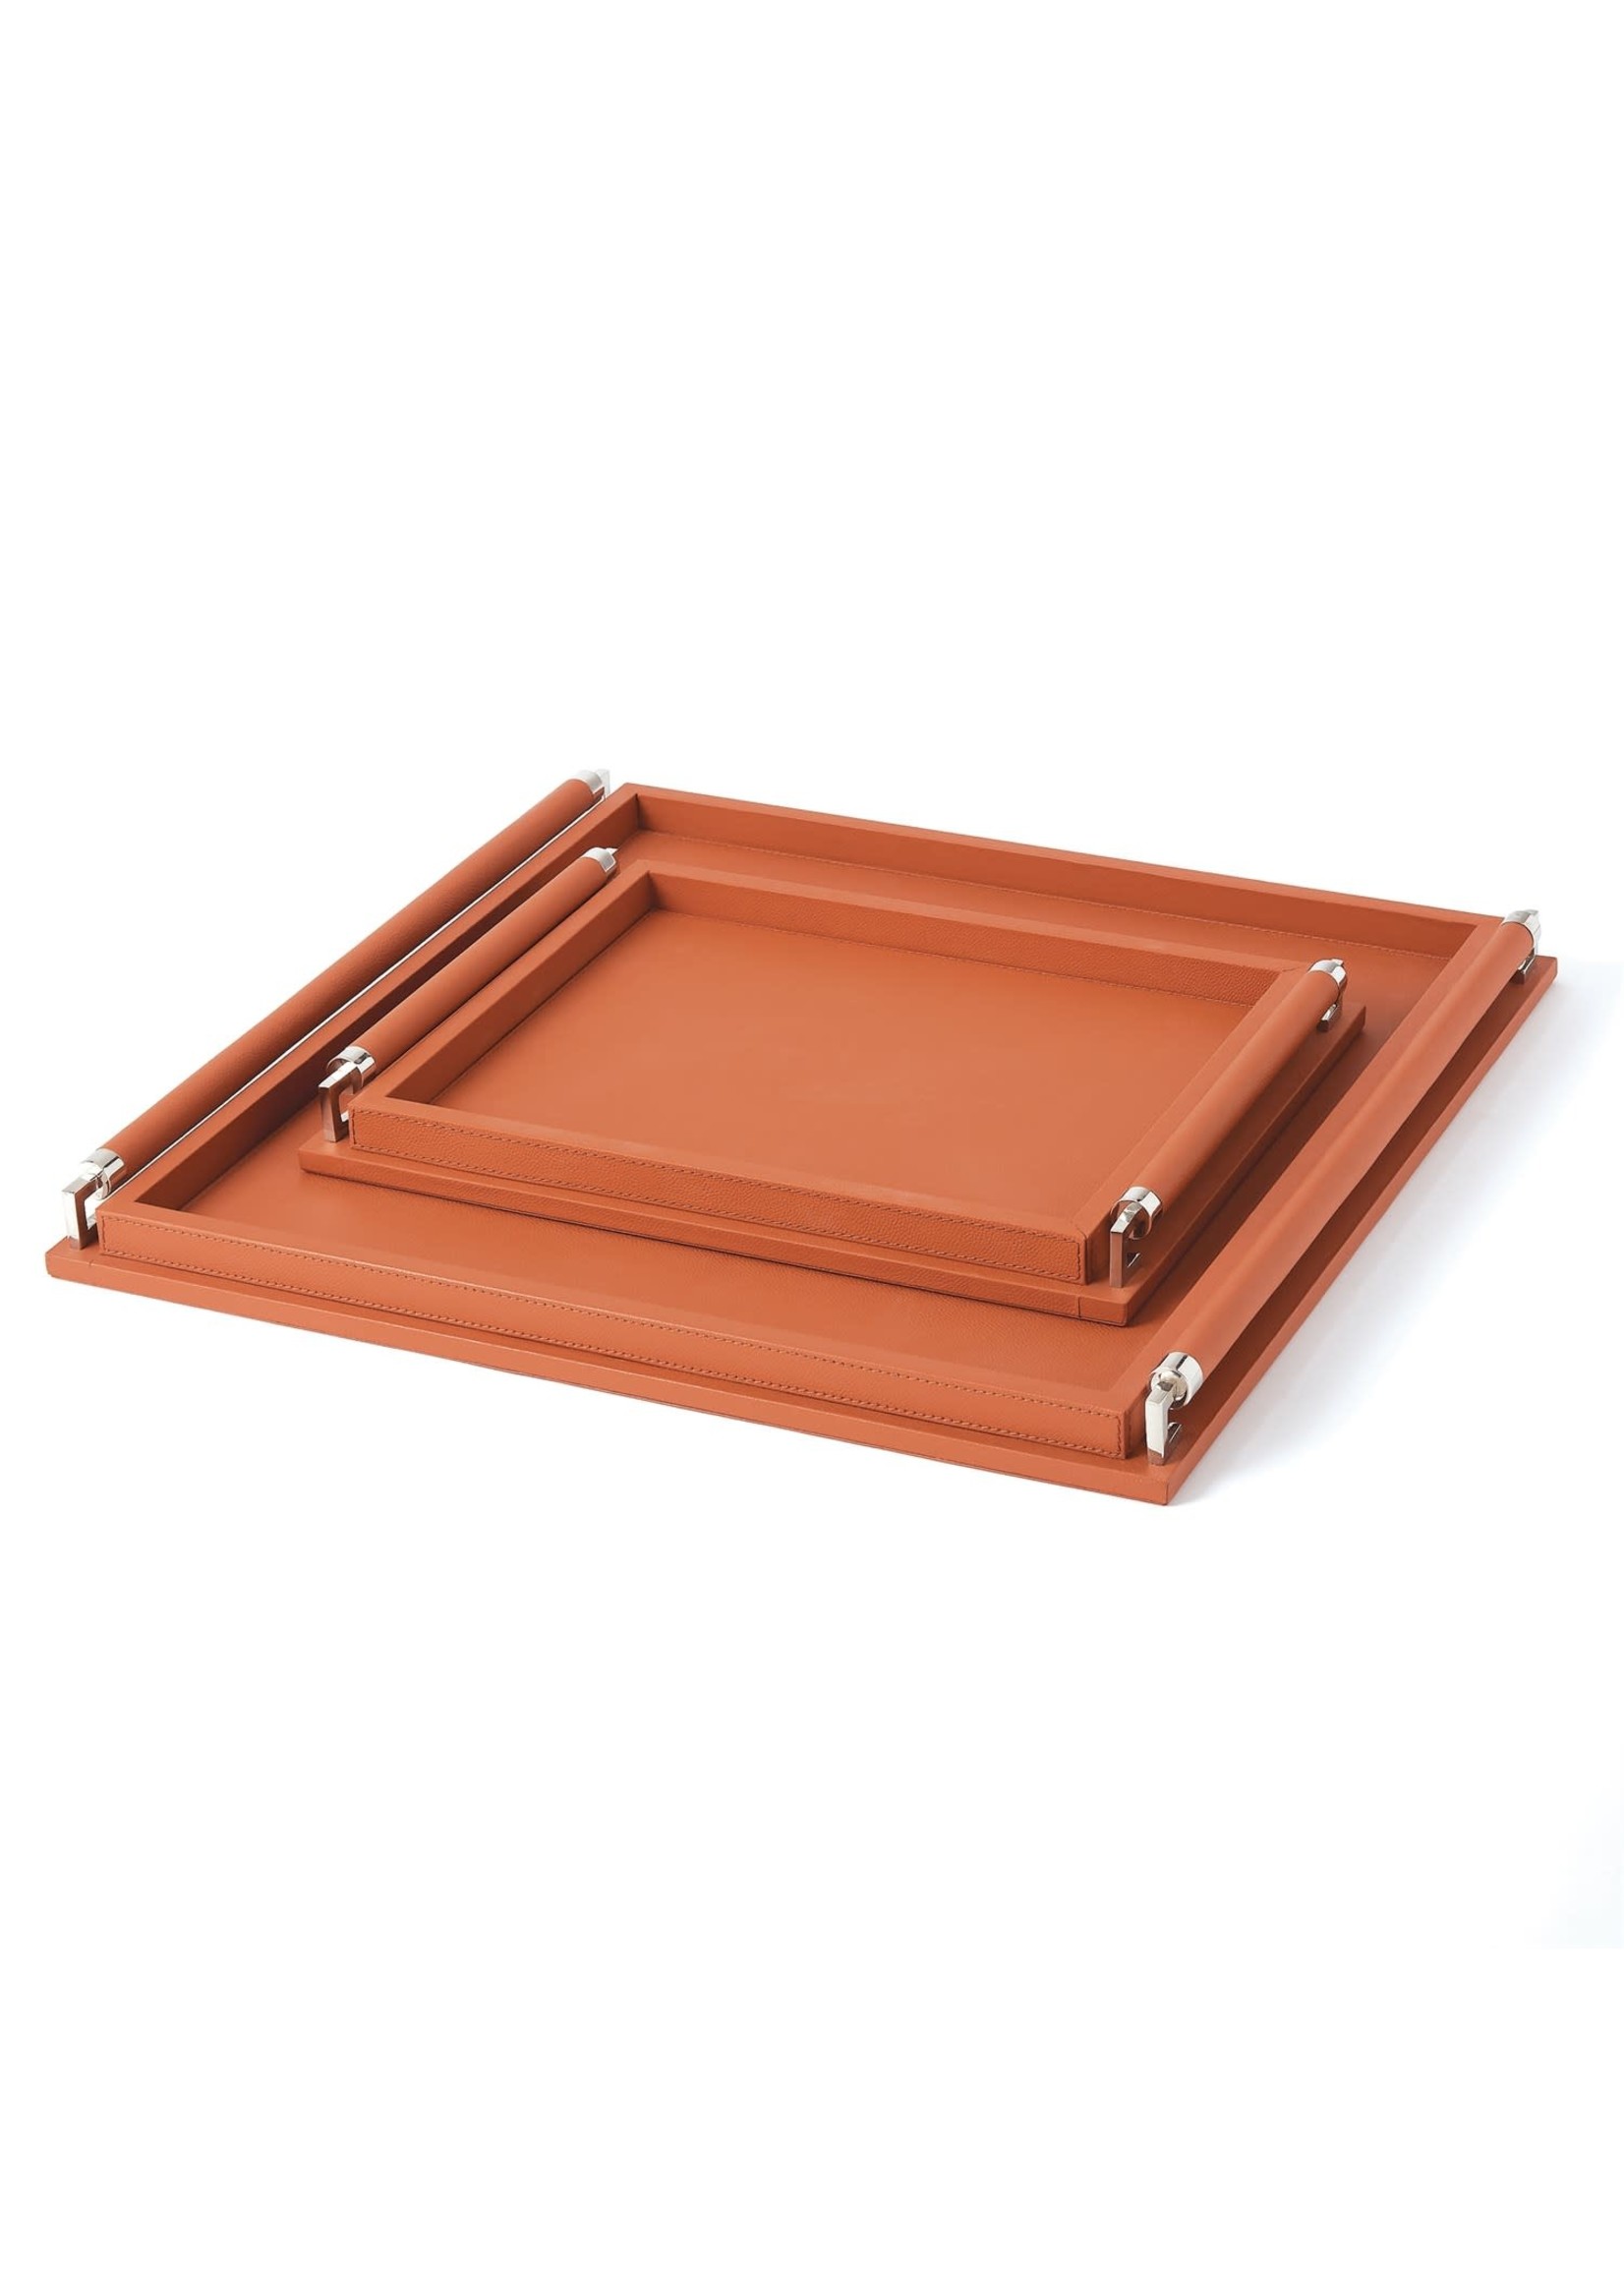 Global Views Global Views Leather Wrapped Tray Coral Large